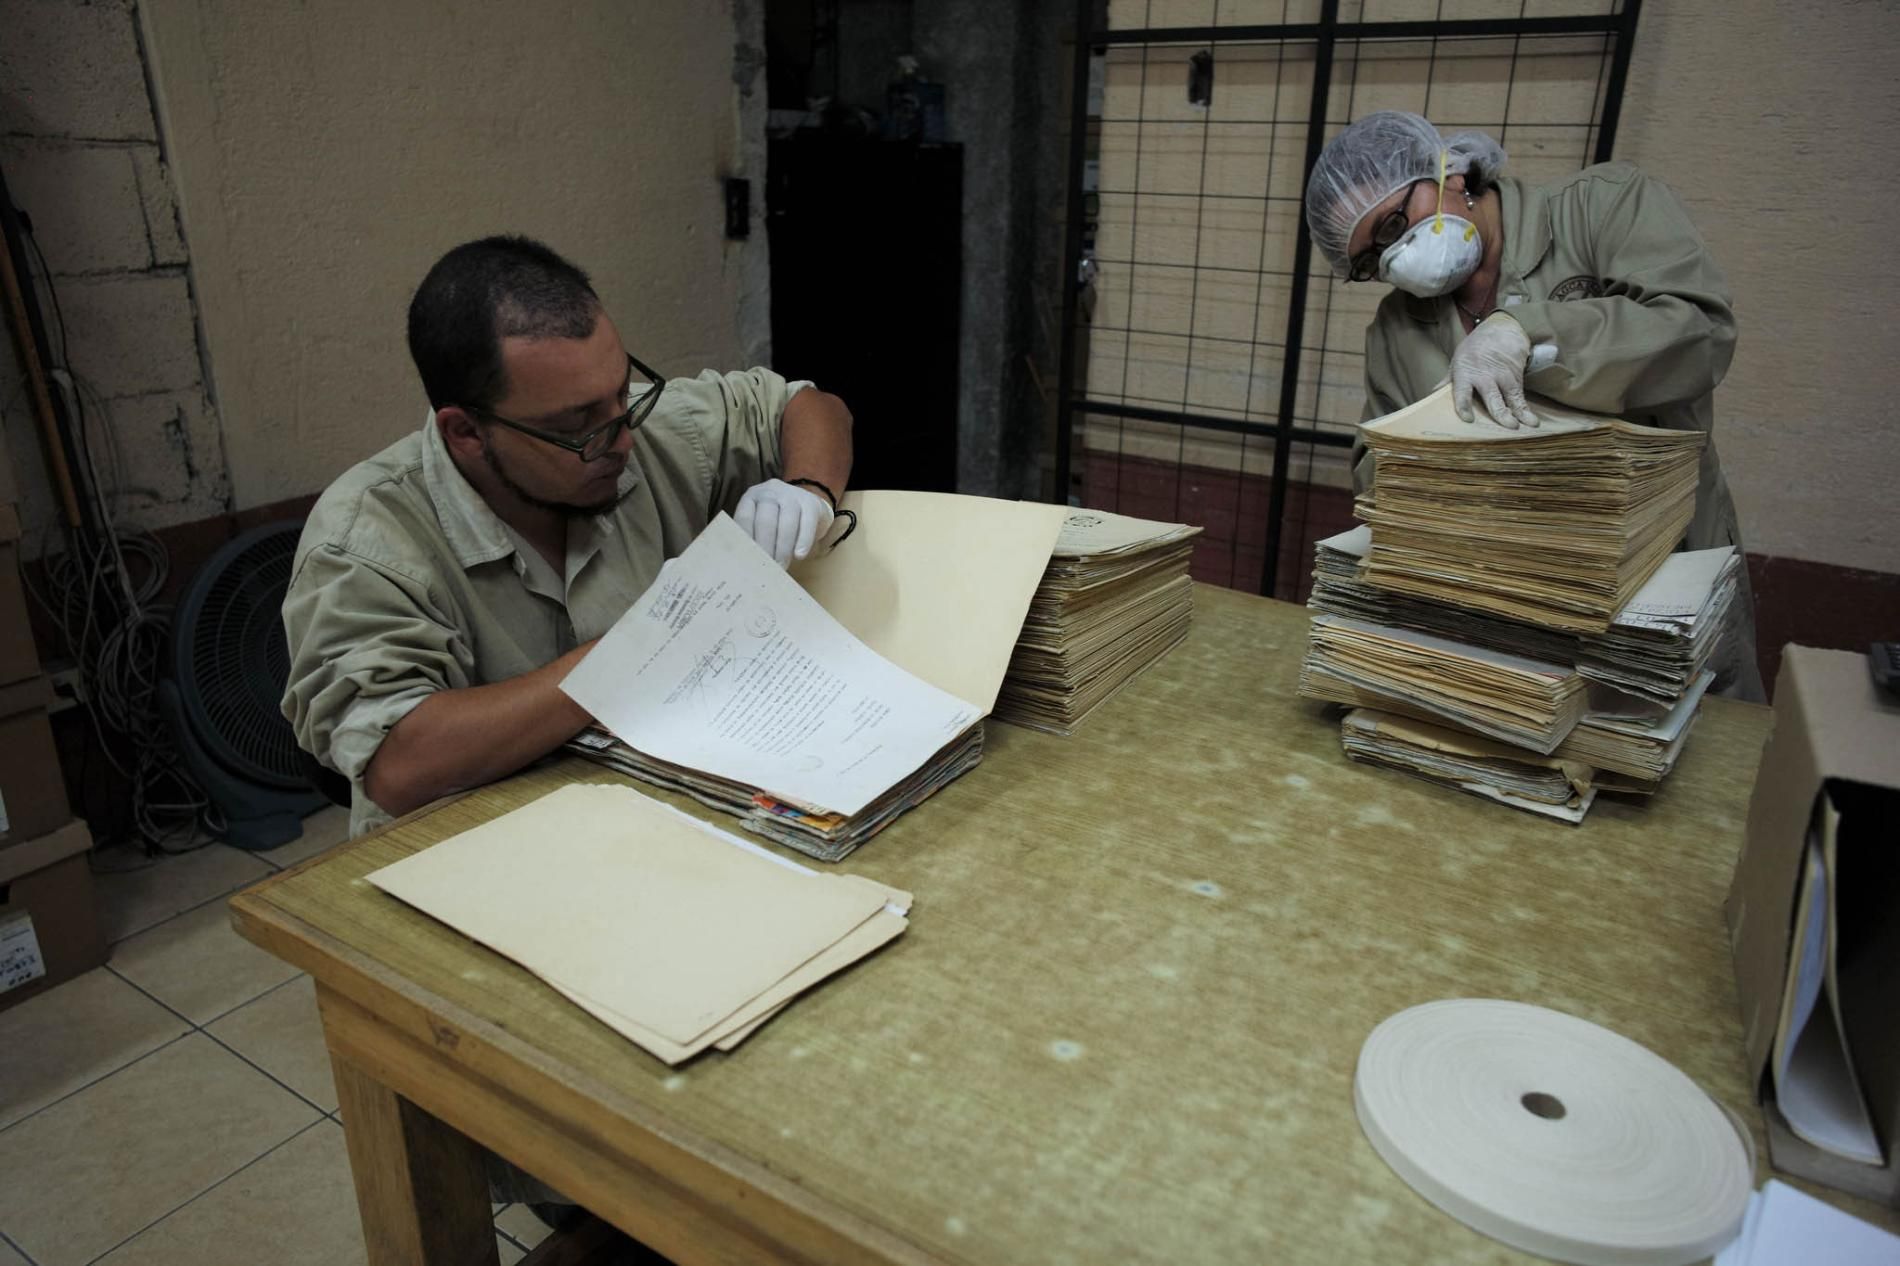 Archivist Oscar Hernández, left, cleans and sorts a file of documents concerning police detention of children and minors in the 1980s. Hernández, 34, was a young boy when his father was abducted by the National Police. In the course of his daily work at the archive, he has discovered some clues to his father’s disappearance, but he may never know the full story. Image by Lynn Johnson. Guatemala, 2017.